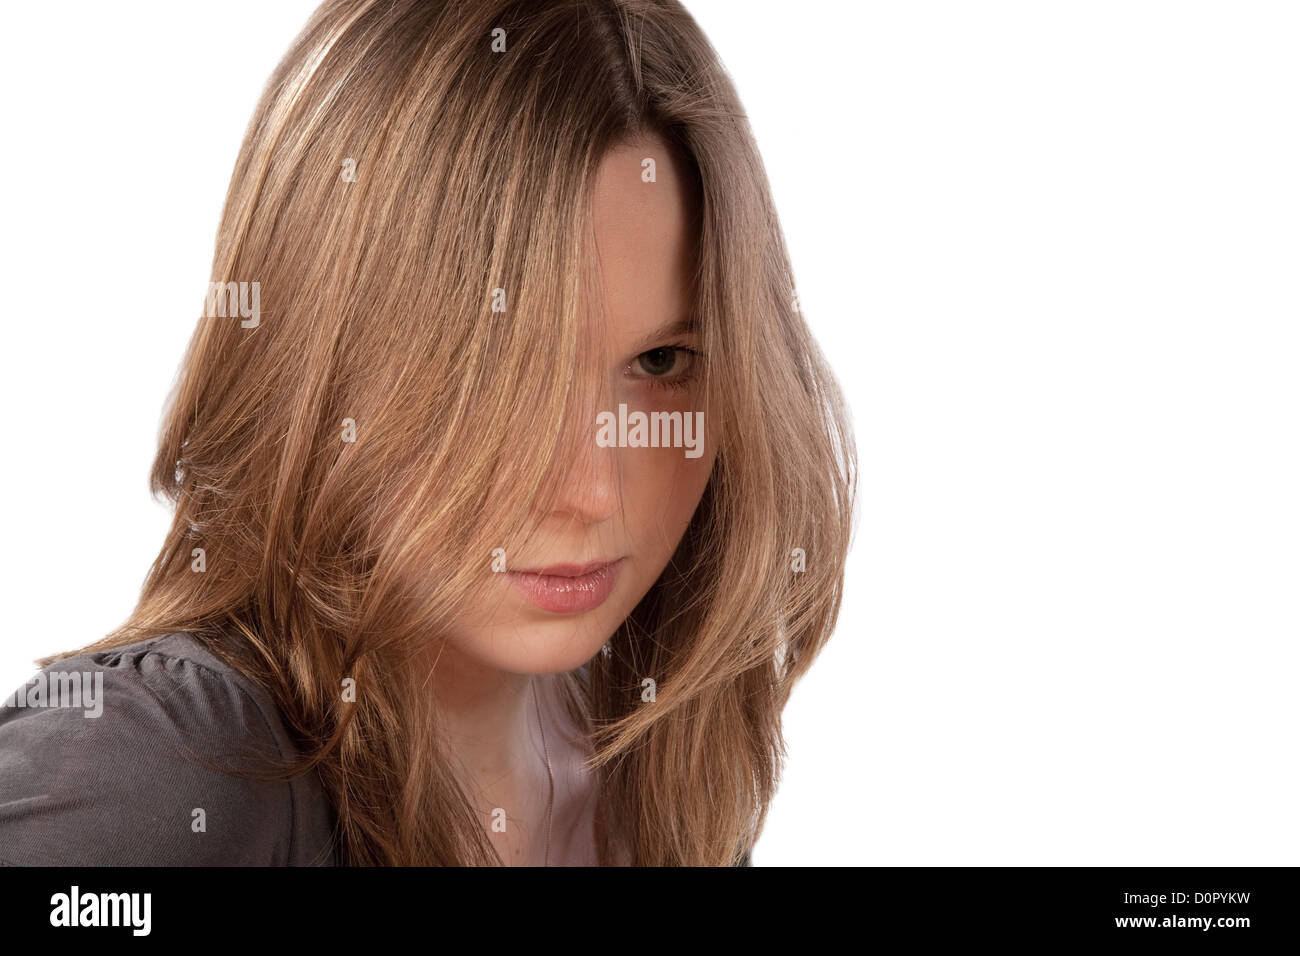 girl with the dismissed hair Stock Photo